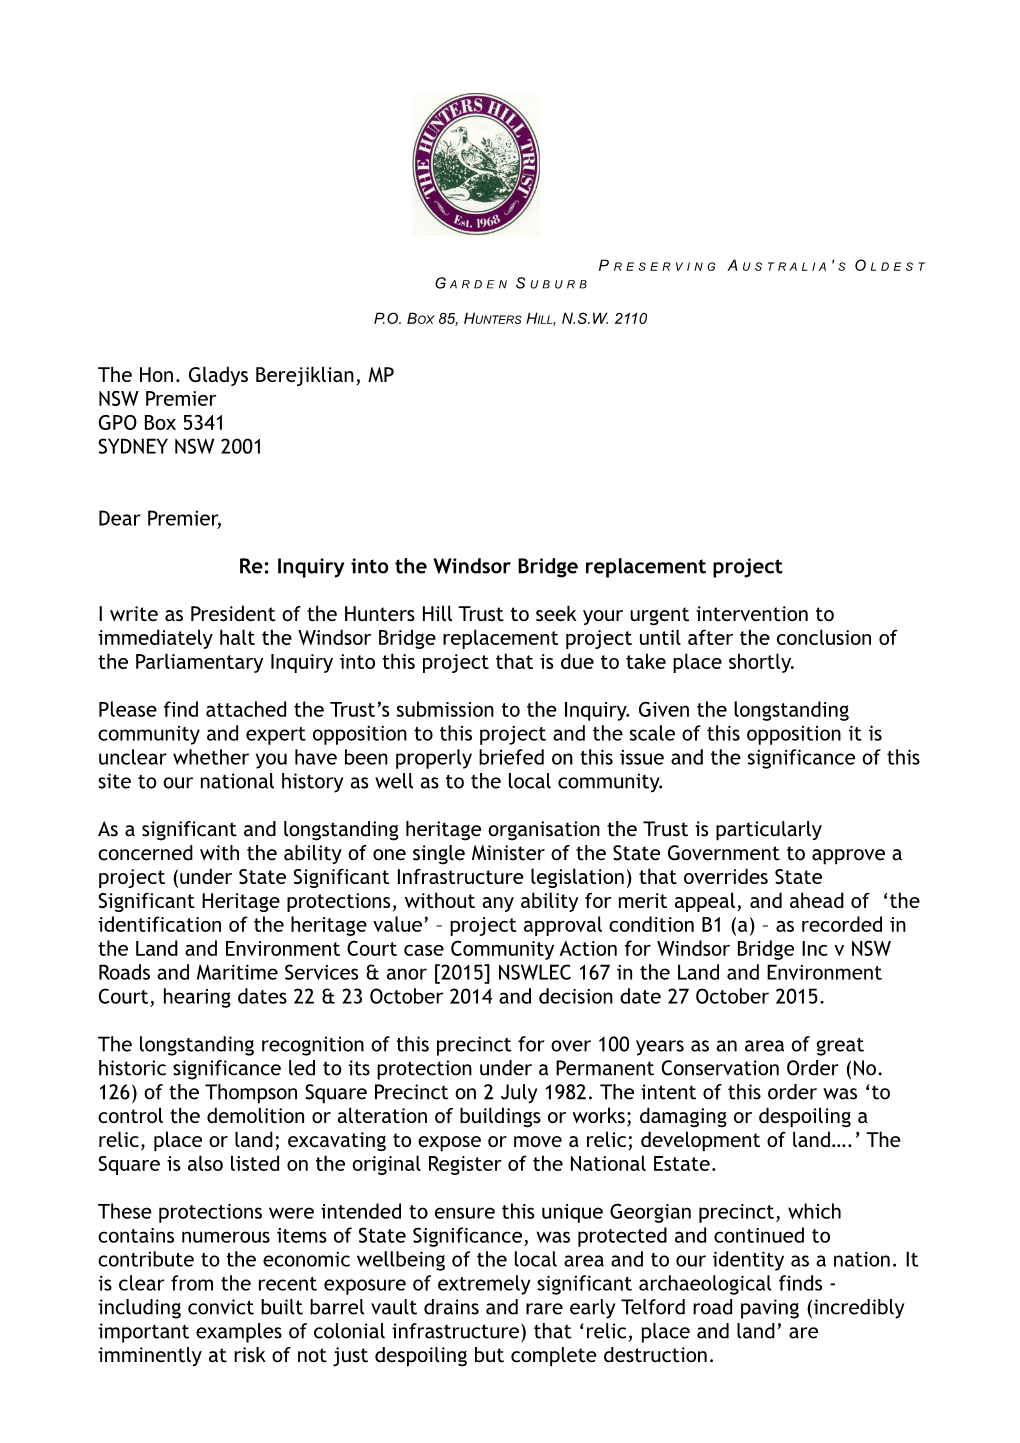 Re: Inquiry Into the Windsor Bridge Replacement Project